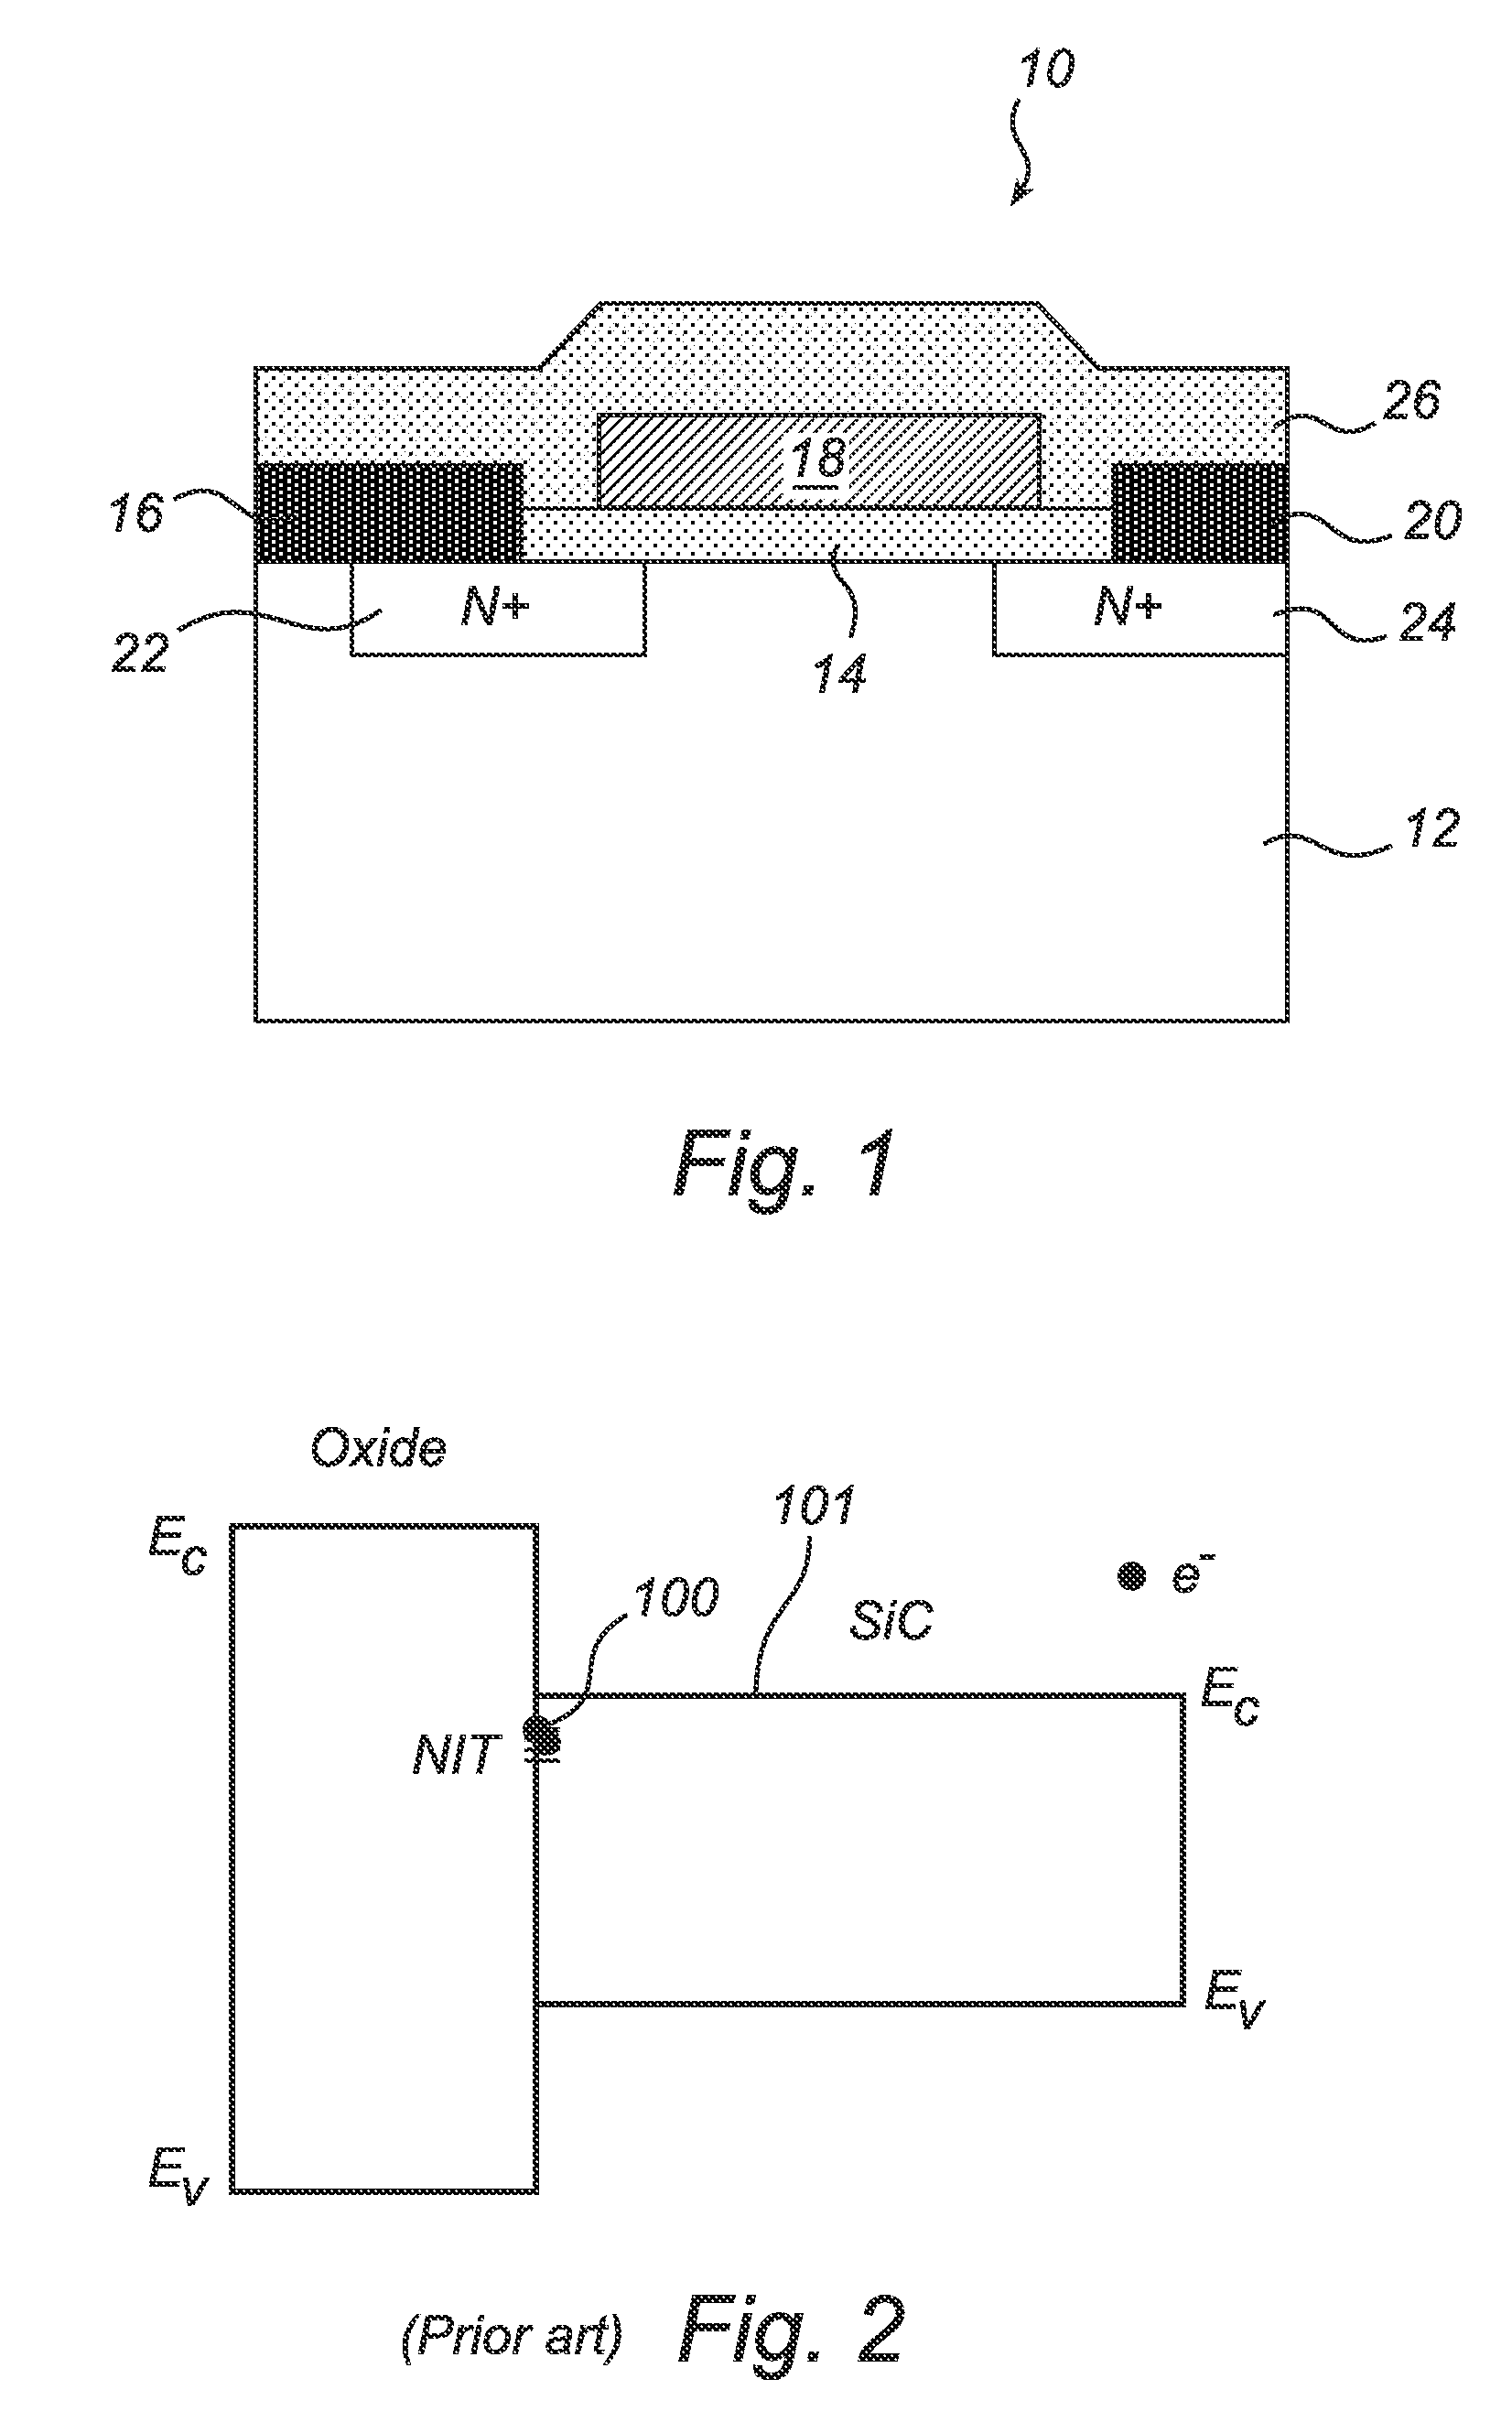 Method for improving inversion layer mobility in a silicon carbide mosfet